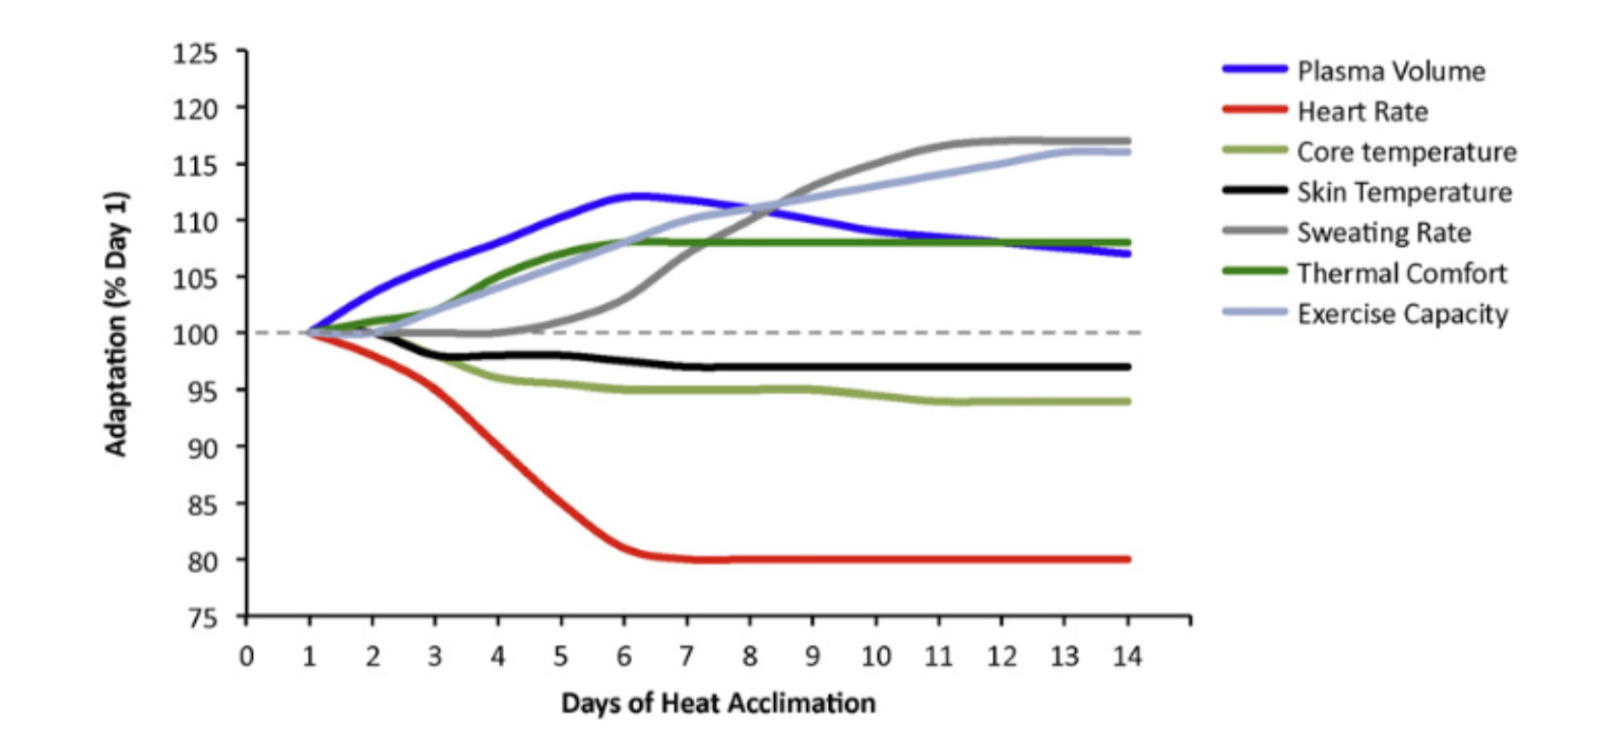 Figure 7: A 14-day time course of human adaptations and responses to heat stress (Reprinted with permission from Périard <em>et al.</em> 2015 and the publisher John Wiley and Sons)